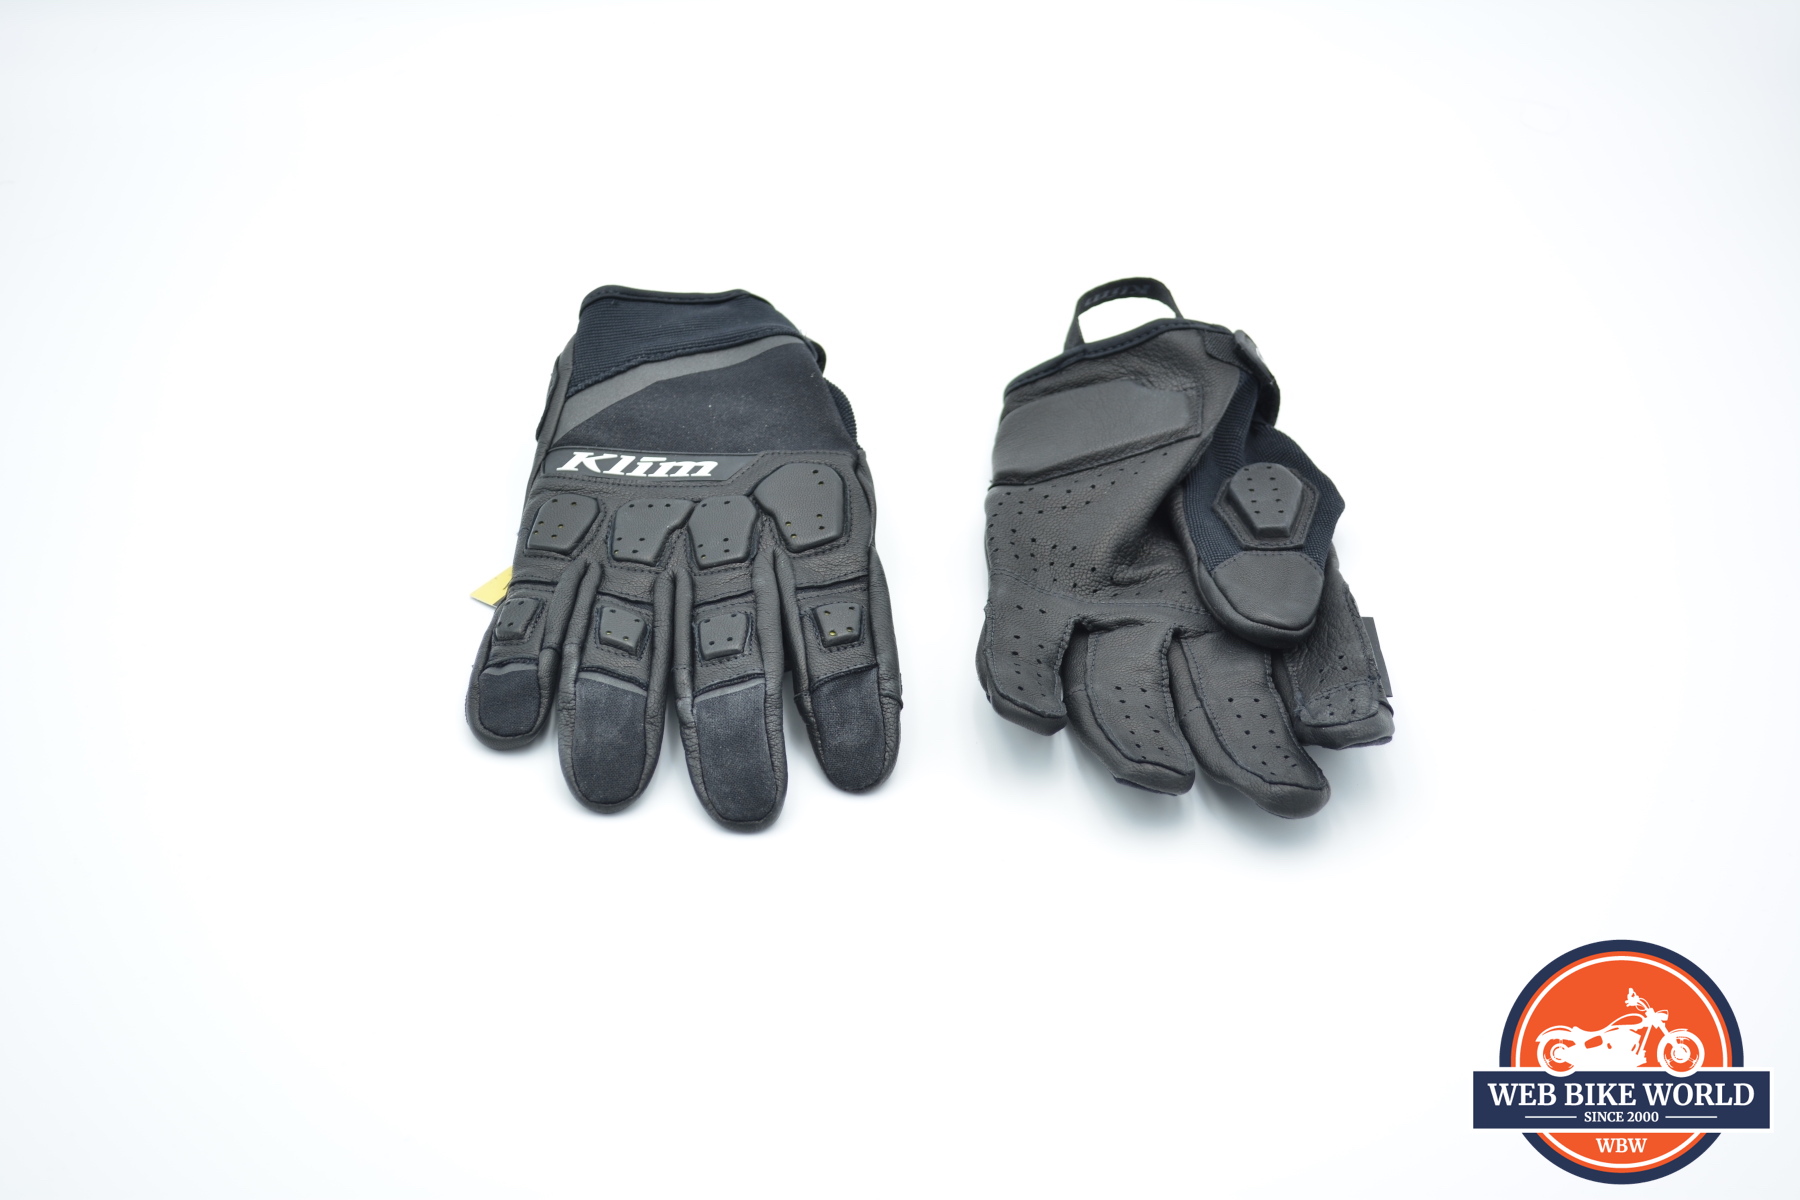 A view of both of the KLIM Dakar Pro Glove, front and back.